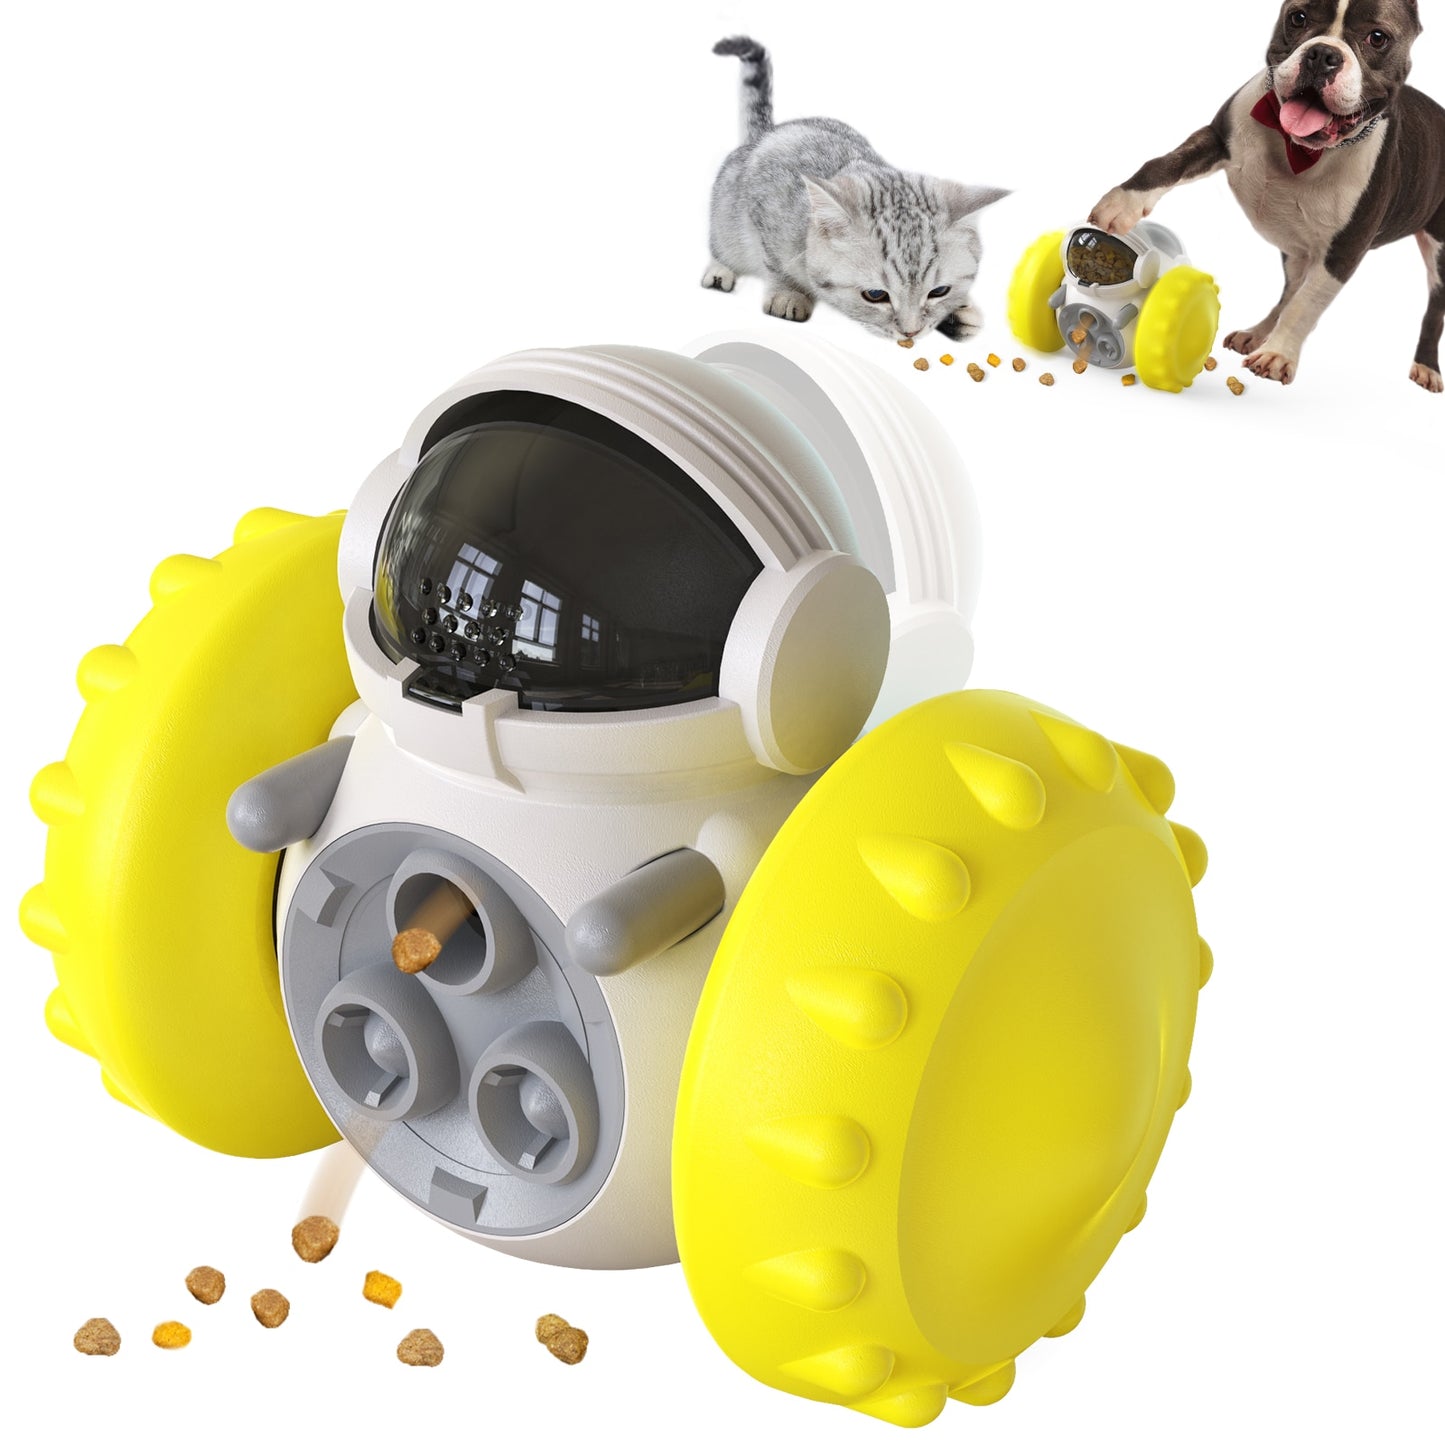 Interactive Slow Feeder Tumbler Toy: Boost Your Dog's IQ and Health with Fun and Engaging Training!